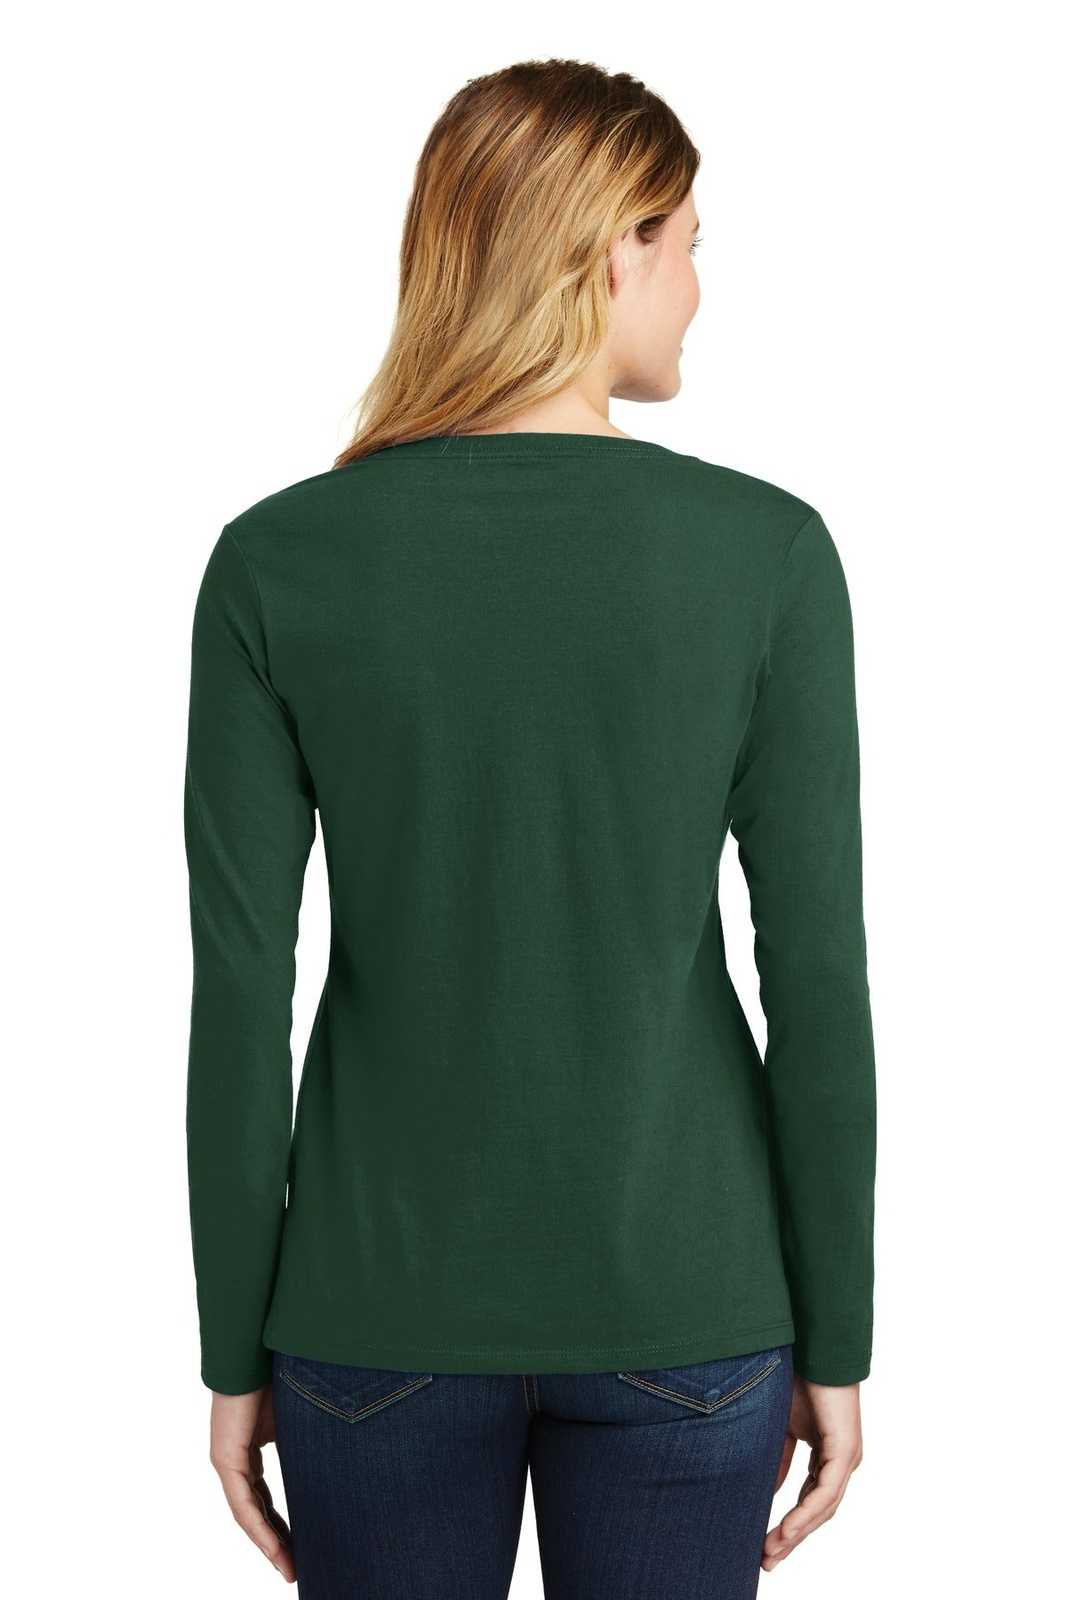 Port & Company LPC450VLS Ladies Long Sleeve Fan Favorite V-Neck Tee - Forest Green - HIT a Double - 1